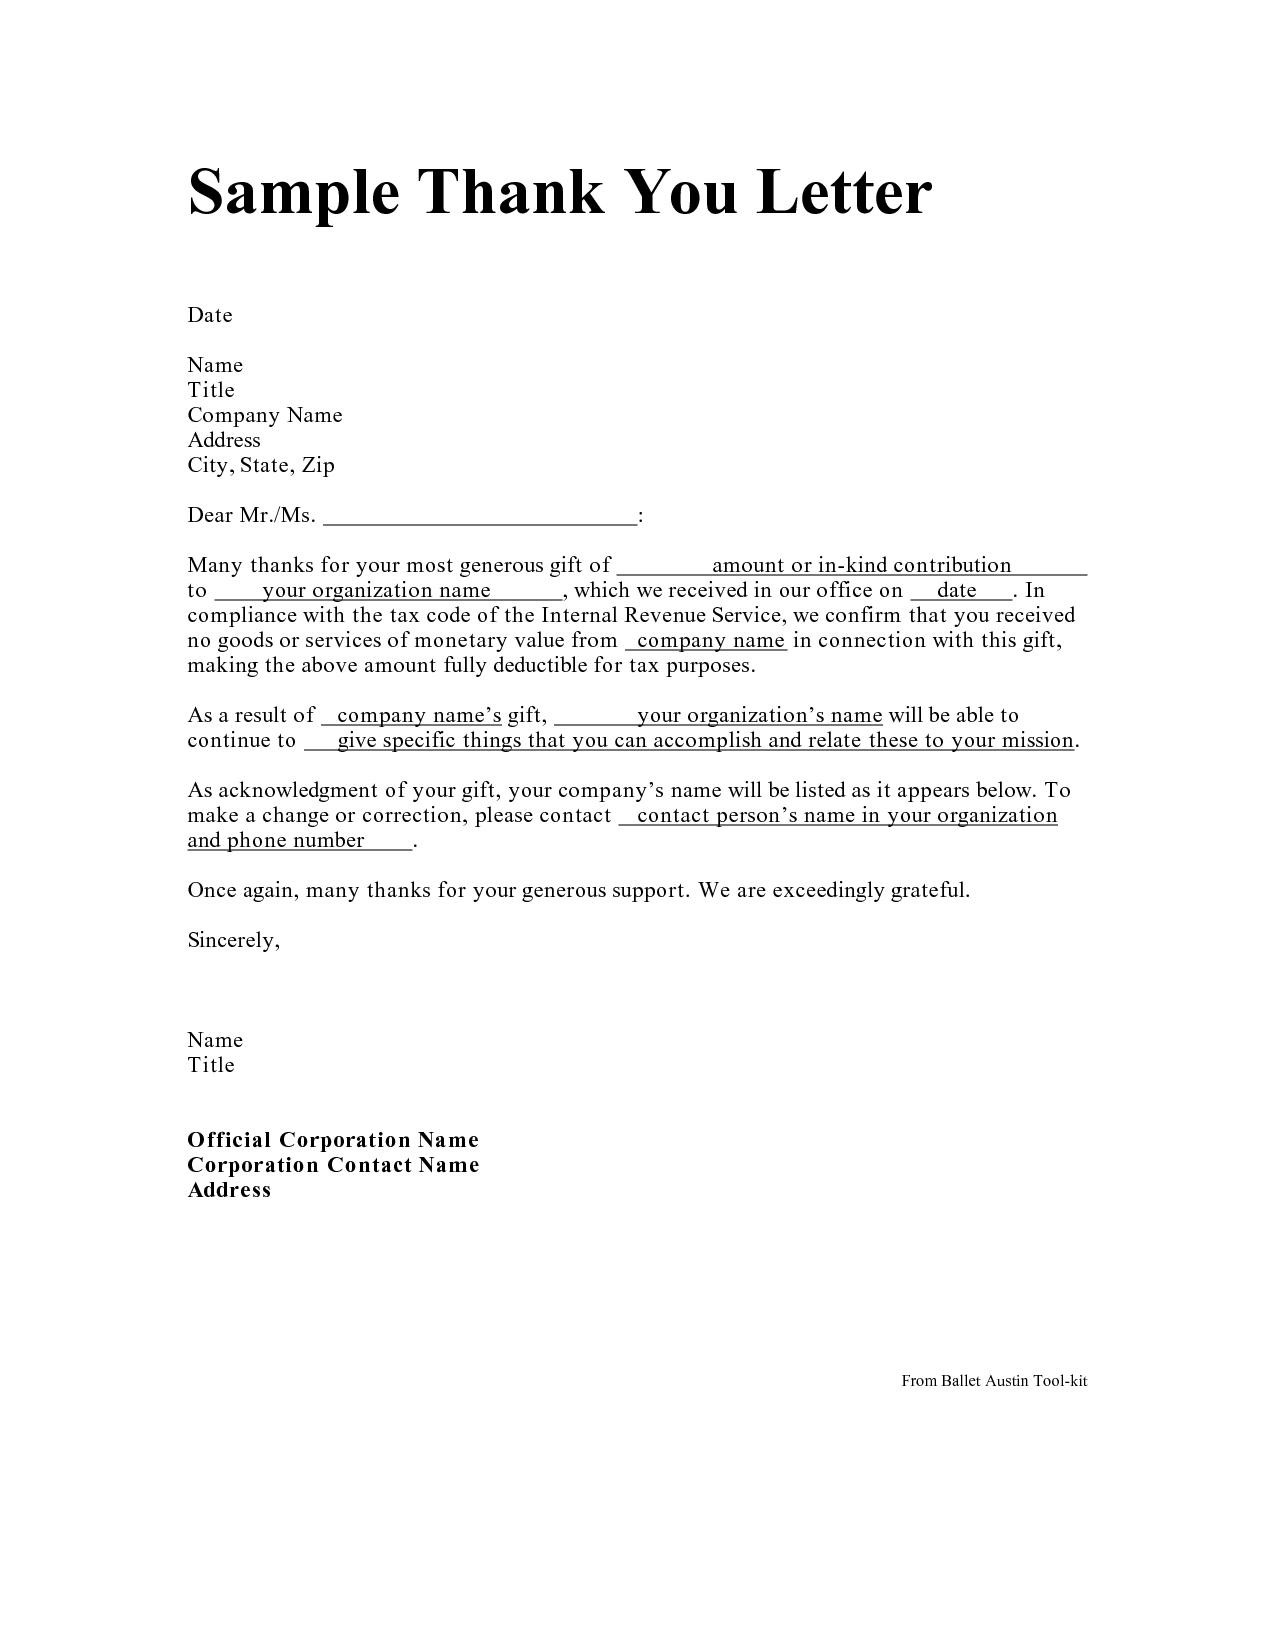 Mission Trip Fundraising Letter Template - Personal Thank You Letter Personal Thank You Letter Samples